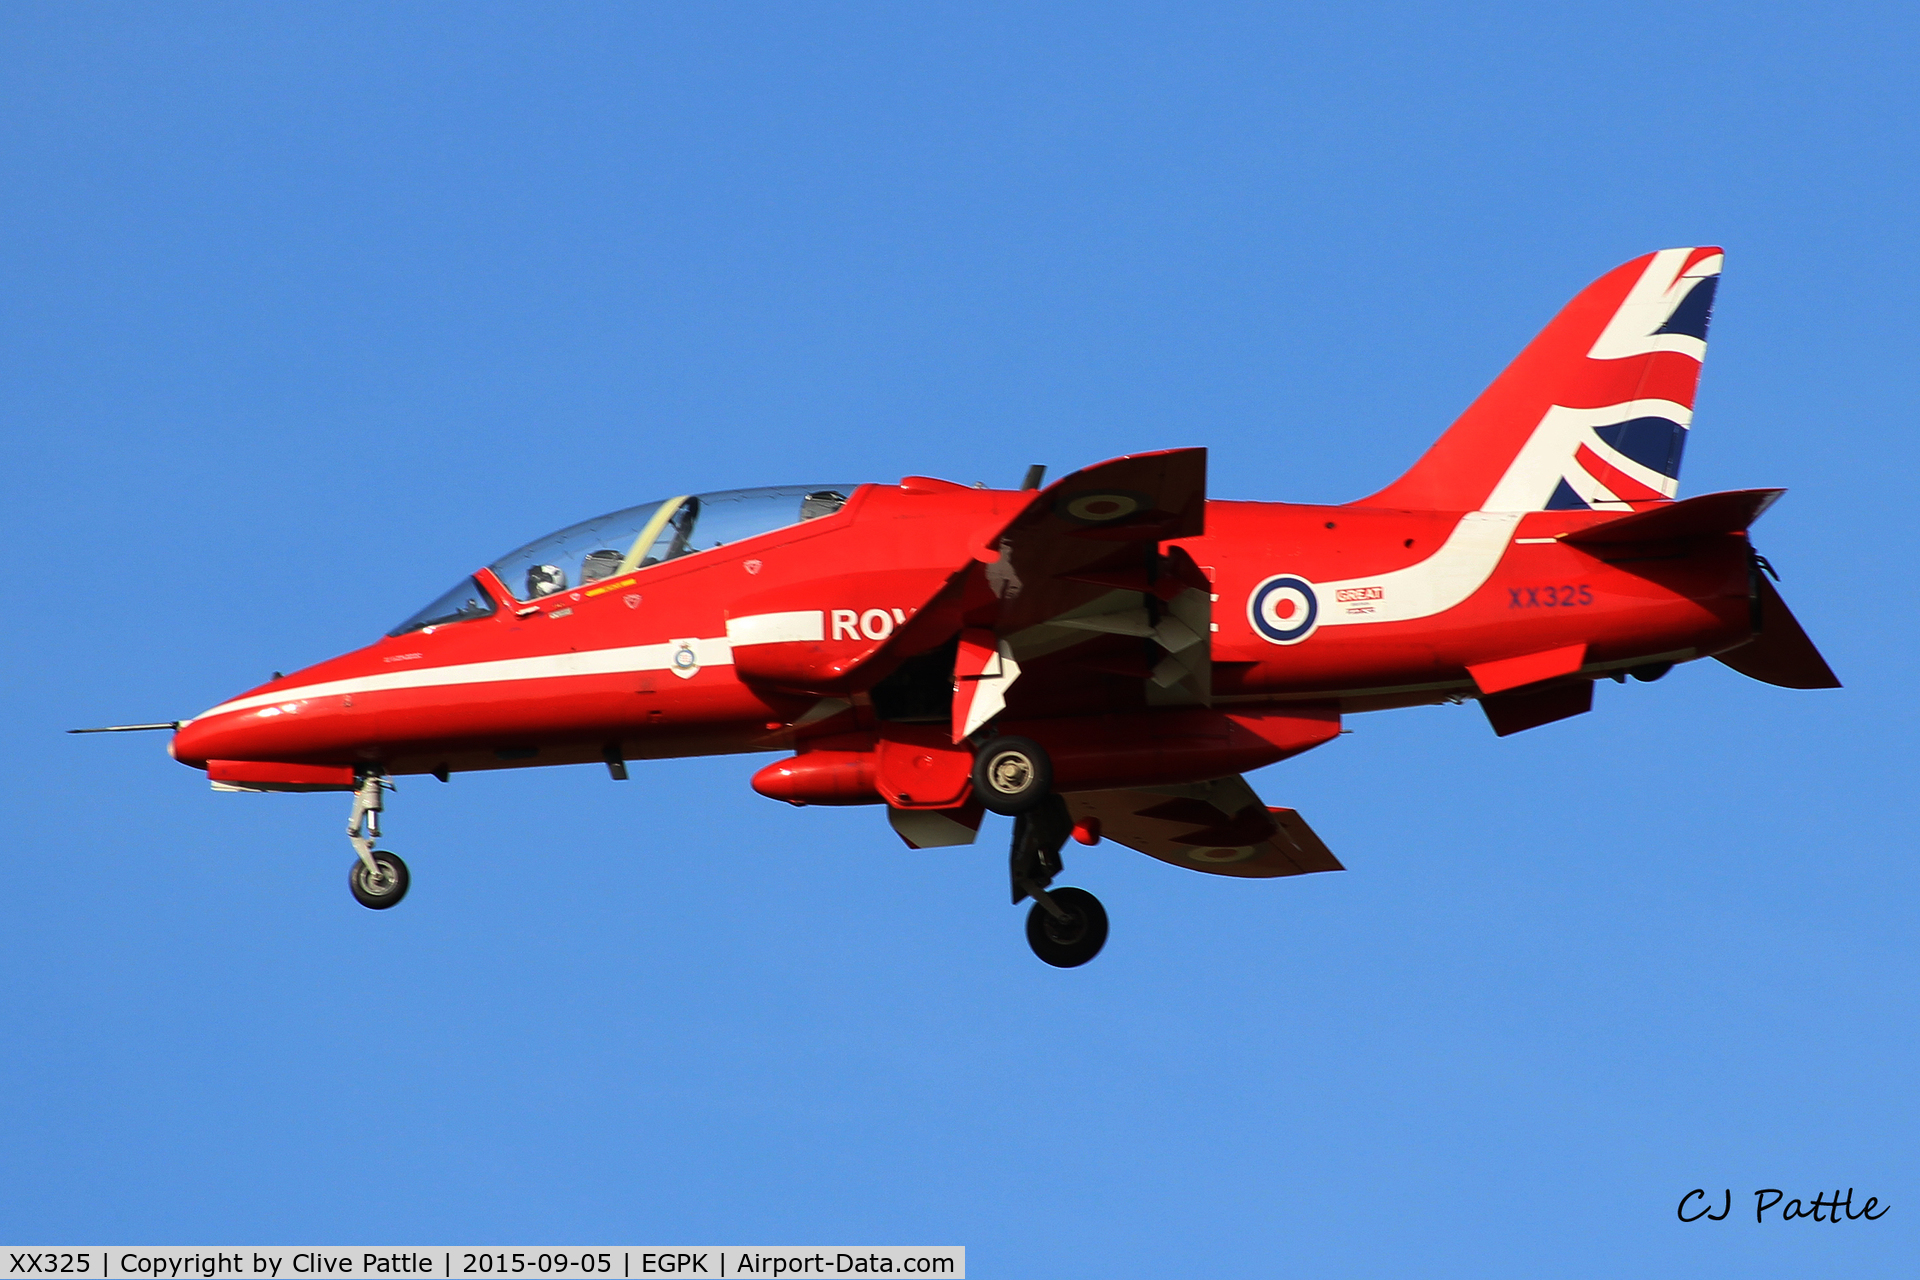 XX325, 1980 Hawker Siddeley Hawk T.1 C/N 169/312150, Flt Lt Joe Hourston 'Red 9' landing back at Prestwick EGPK after displaying with the Red Arrows at the Scottish Airshow 2015 held at Ayr seafront and Prestwick Airport EGPK and at Portrush, Northern Ireland on the same day.